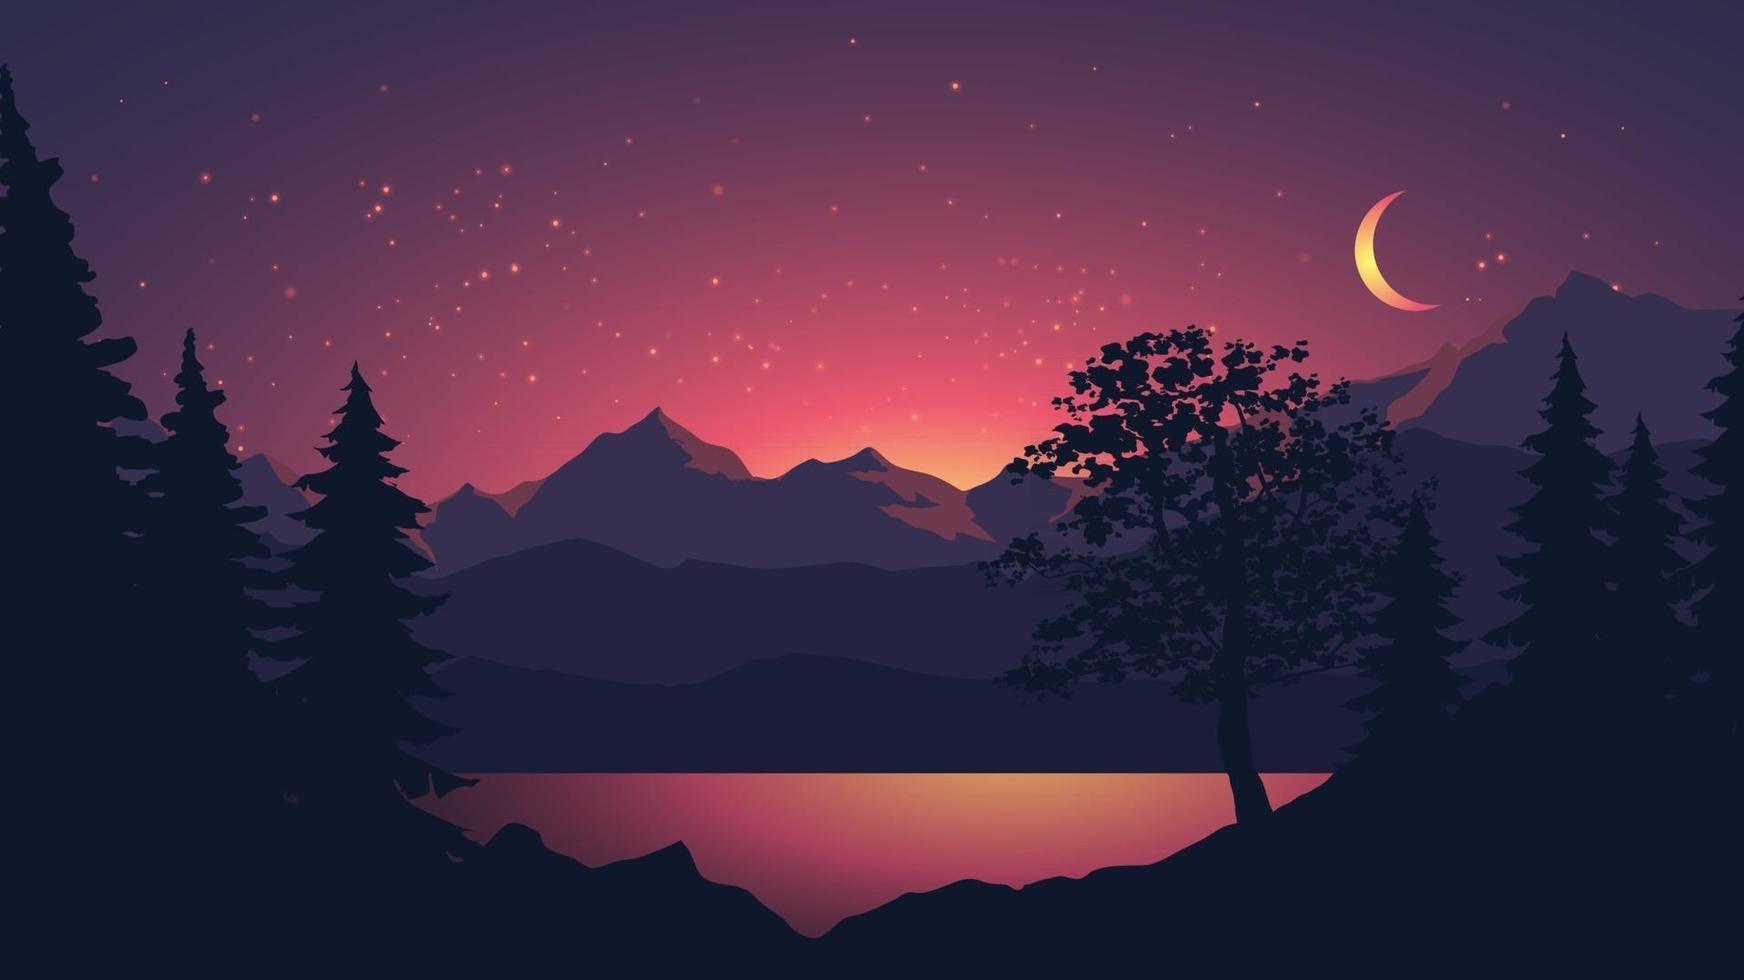 Beautiful Night Landscape With Mountain And Lake vector